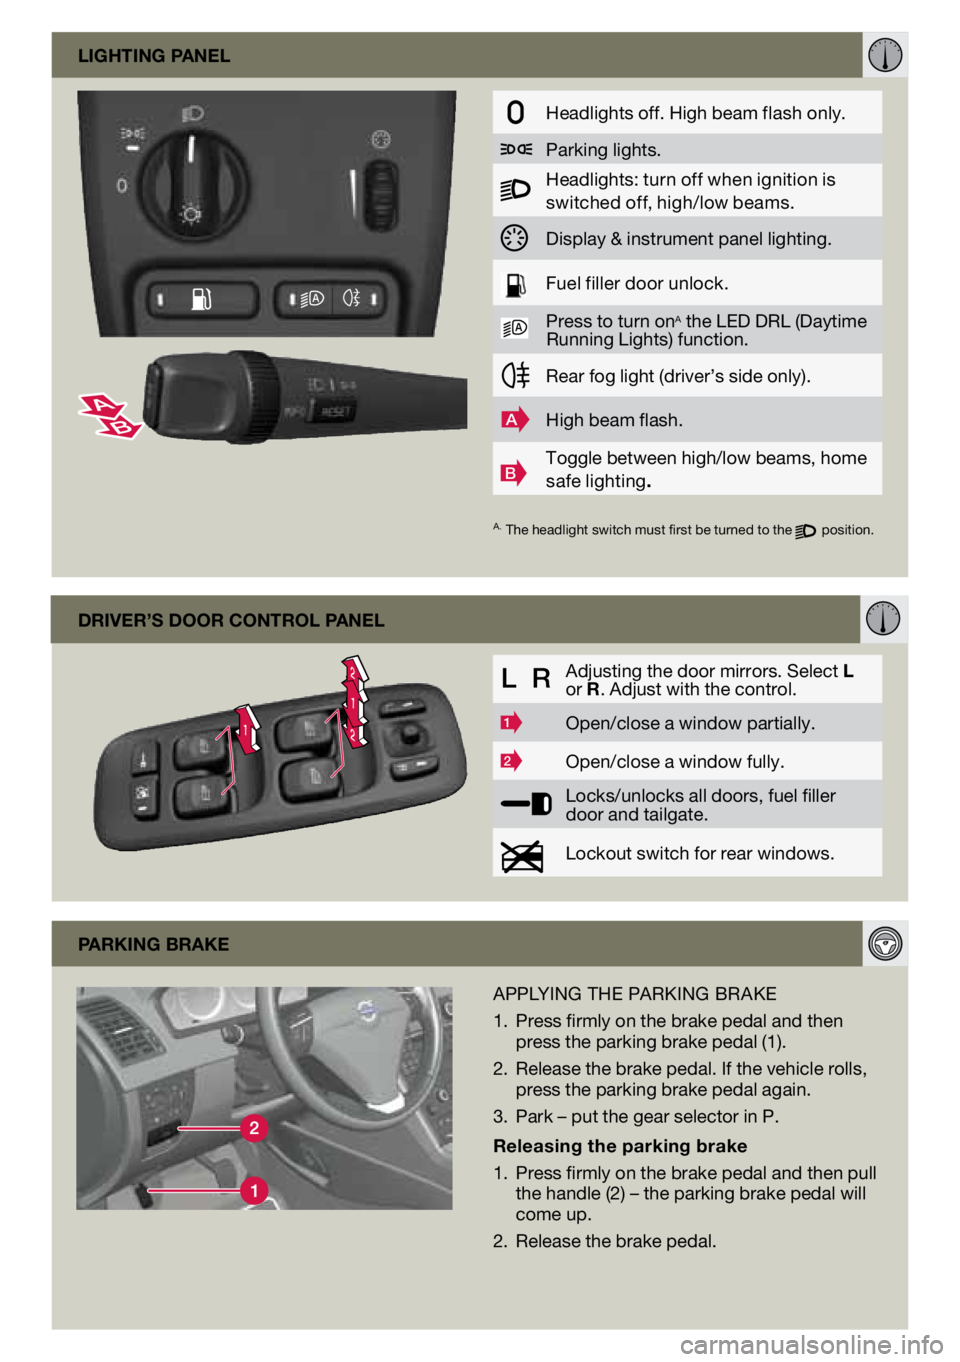 VOLVO XC90 2013  Quick Guide 1
221
driver’s door control panel
L  RAdjusting the door mirrors. Select l 
or 
r. Adjust with the control.
1Open/close a window partially.
2Open/close a window fully.
Locks/unlocks all doors, fuel 